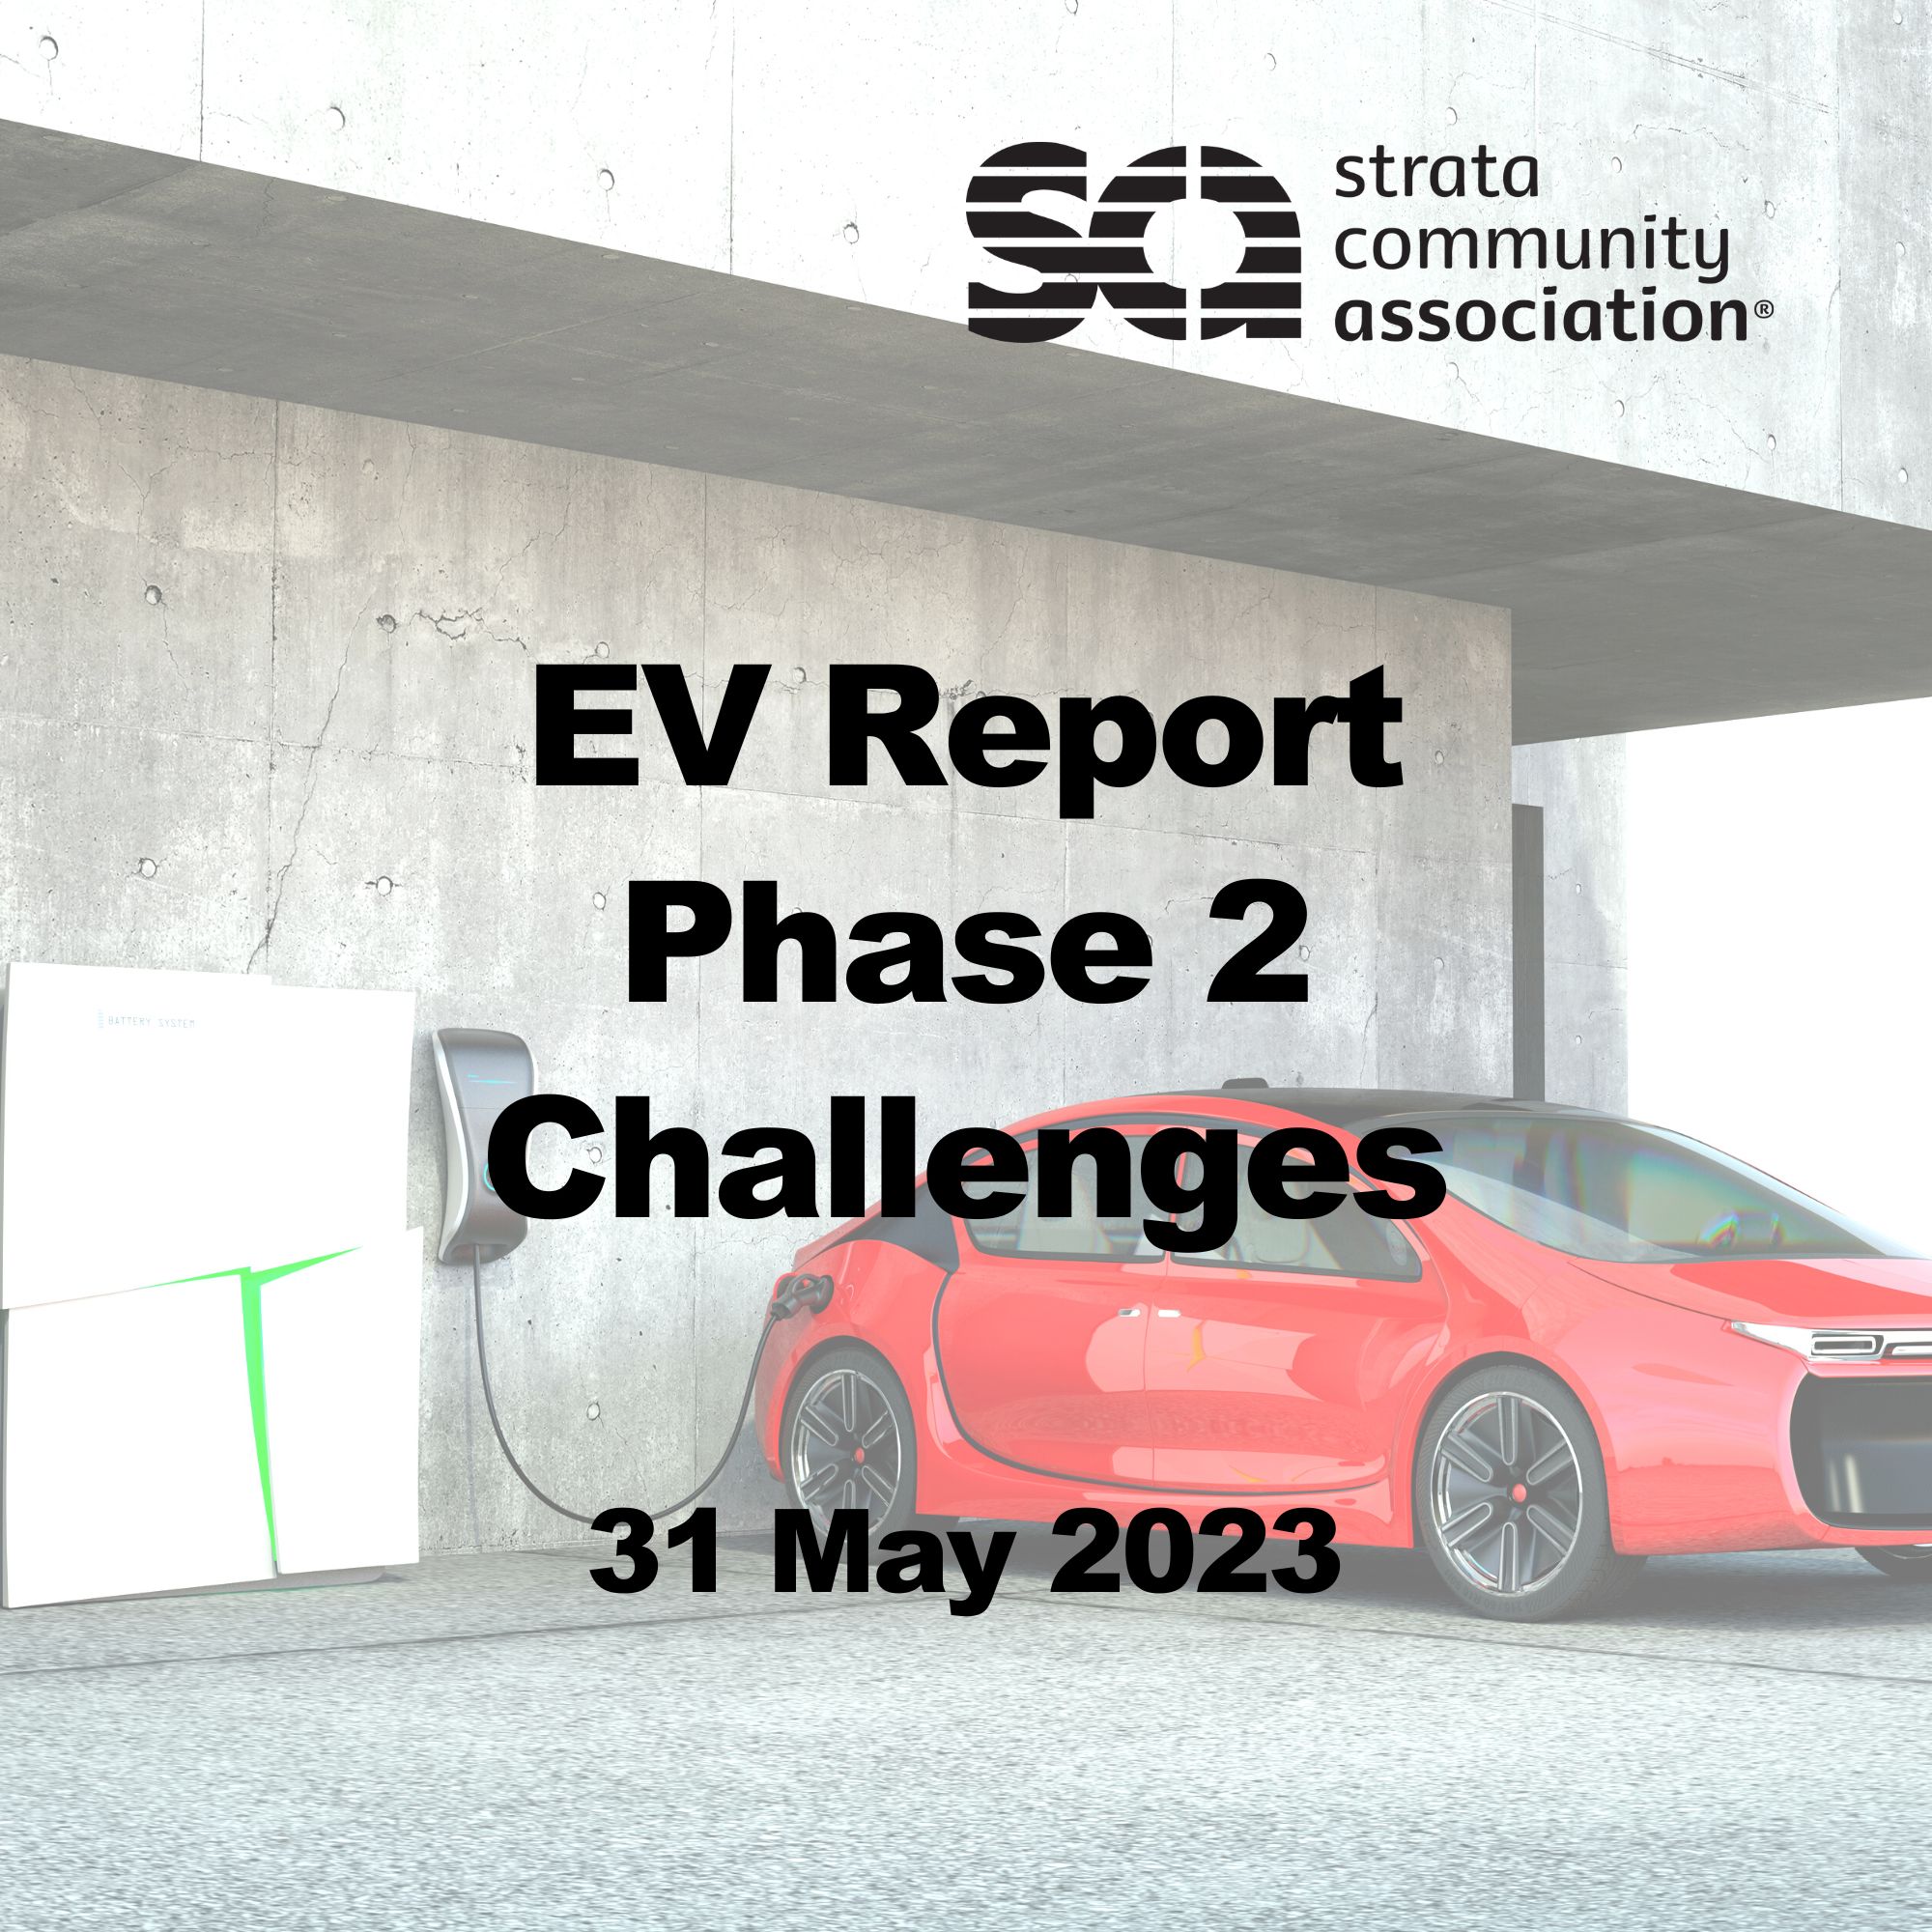 SCA EV Challenges and Opportunities Webinar